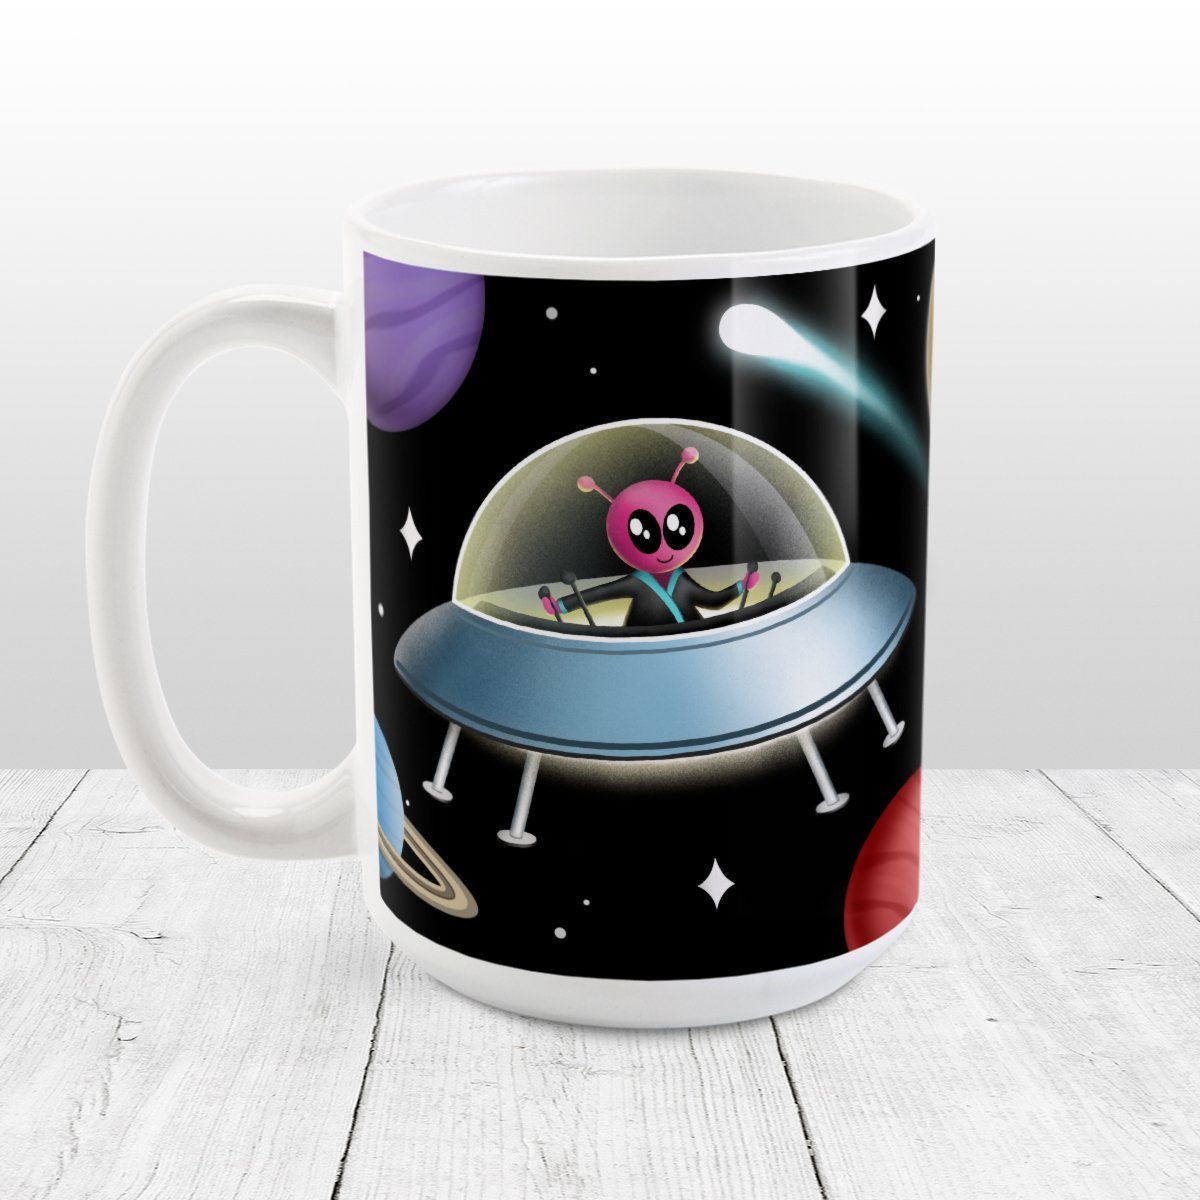 Galaxy Pink Alien Spaceship Mug at Amy's Coffee Mugs. A galaxy spaceship mug designed with an illustration of a pink alien in a spaceship in a galaxy design with planets, stars, comets, and a moon over a black background.